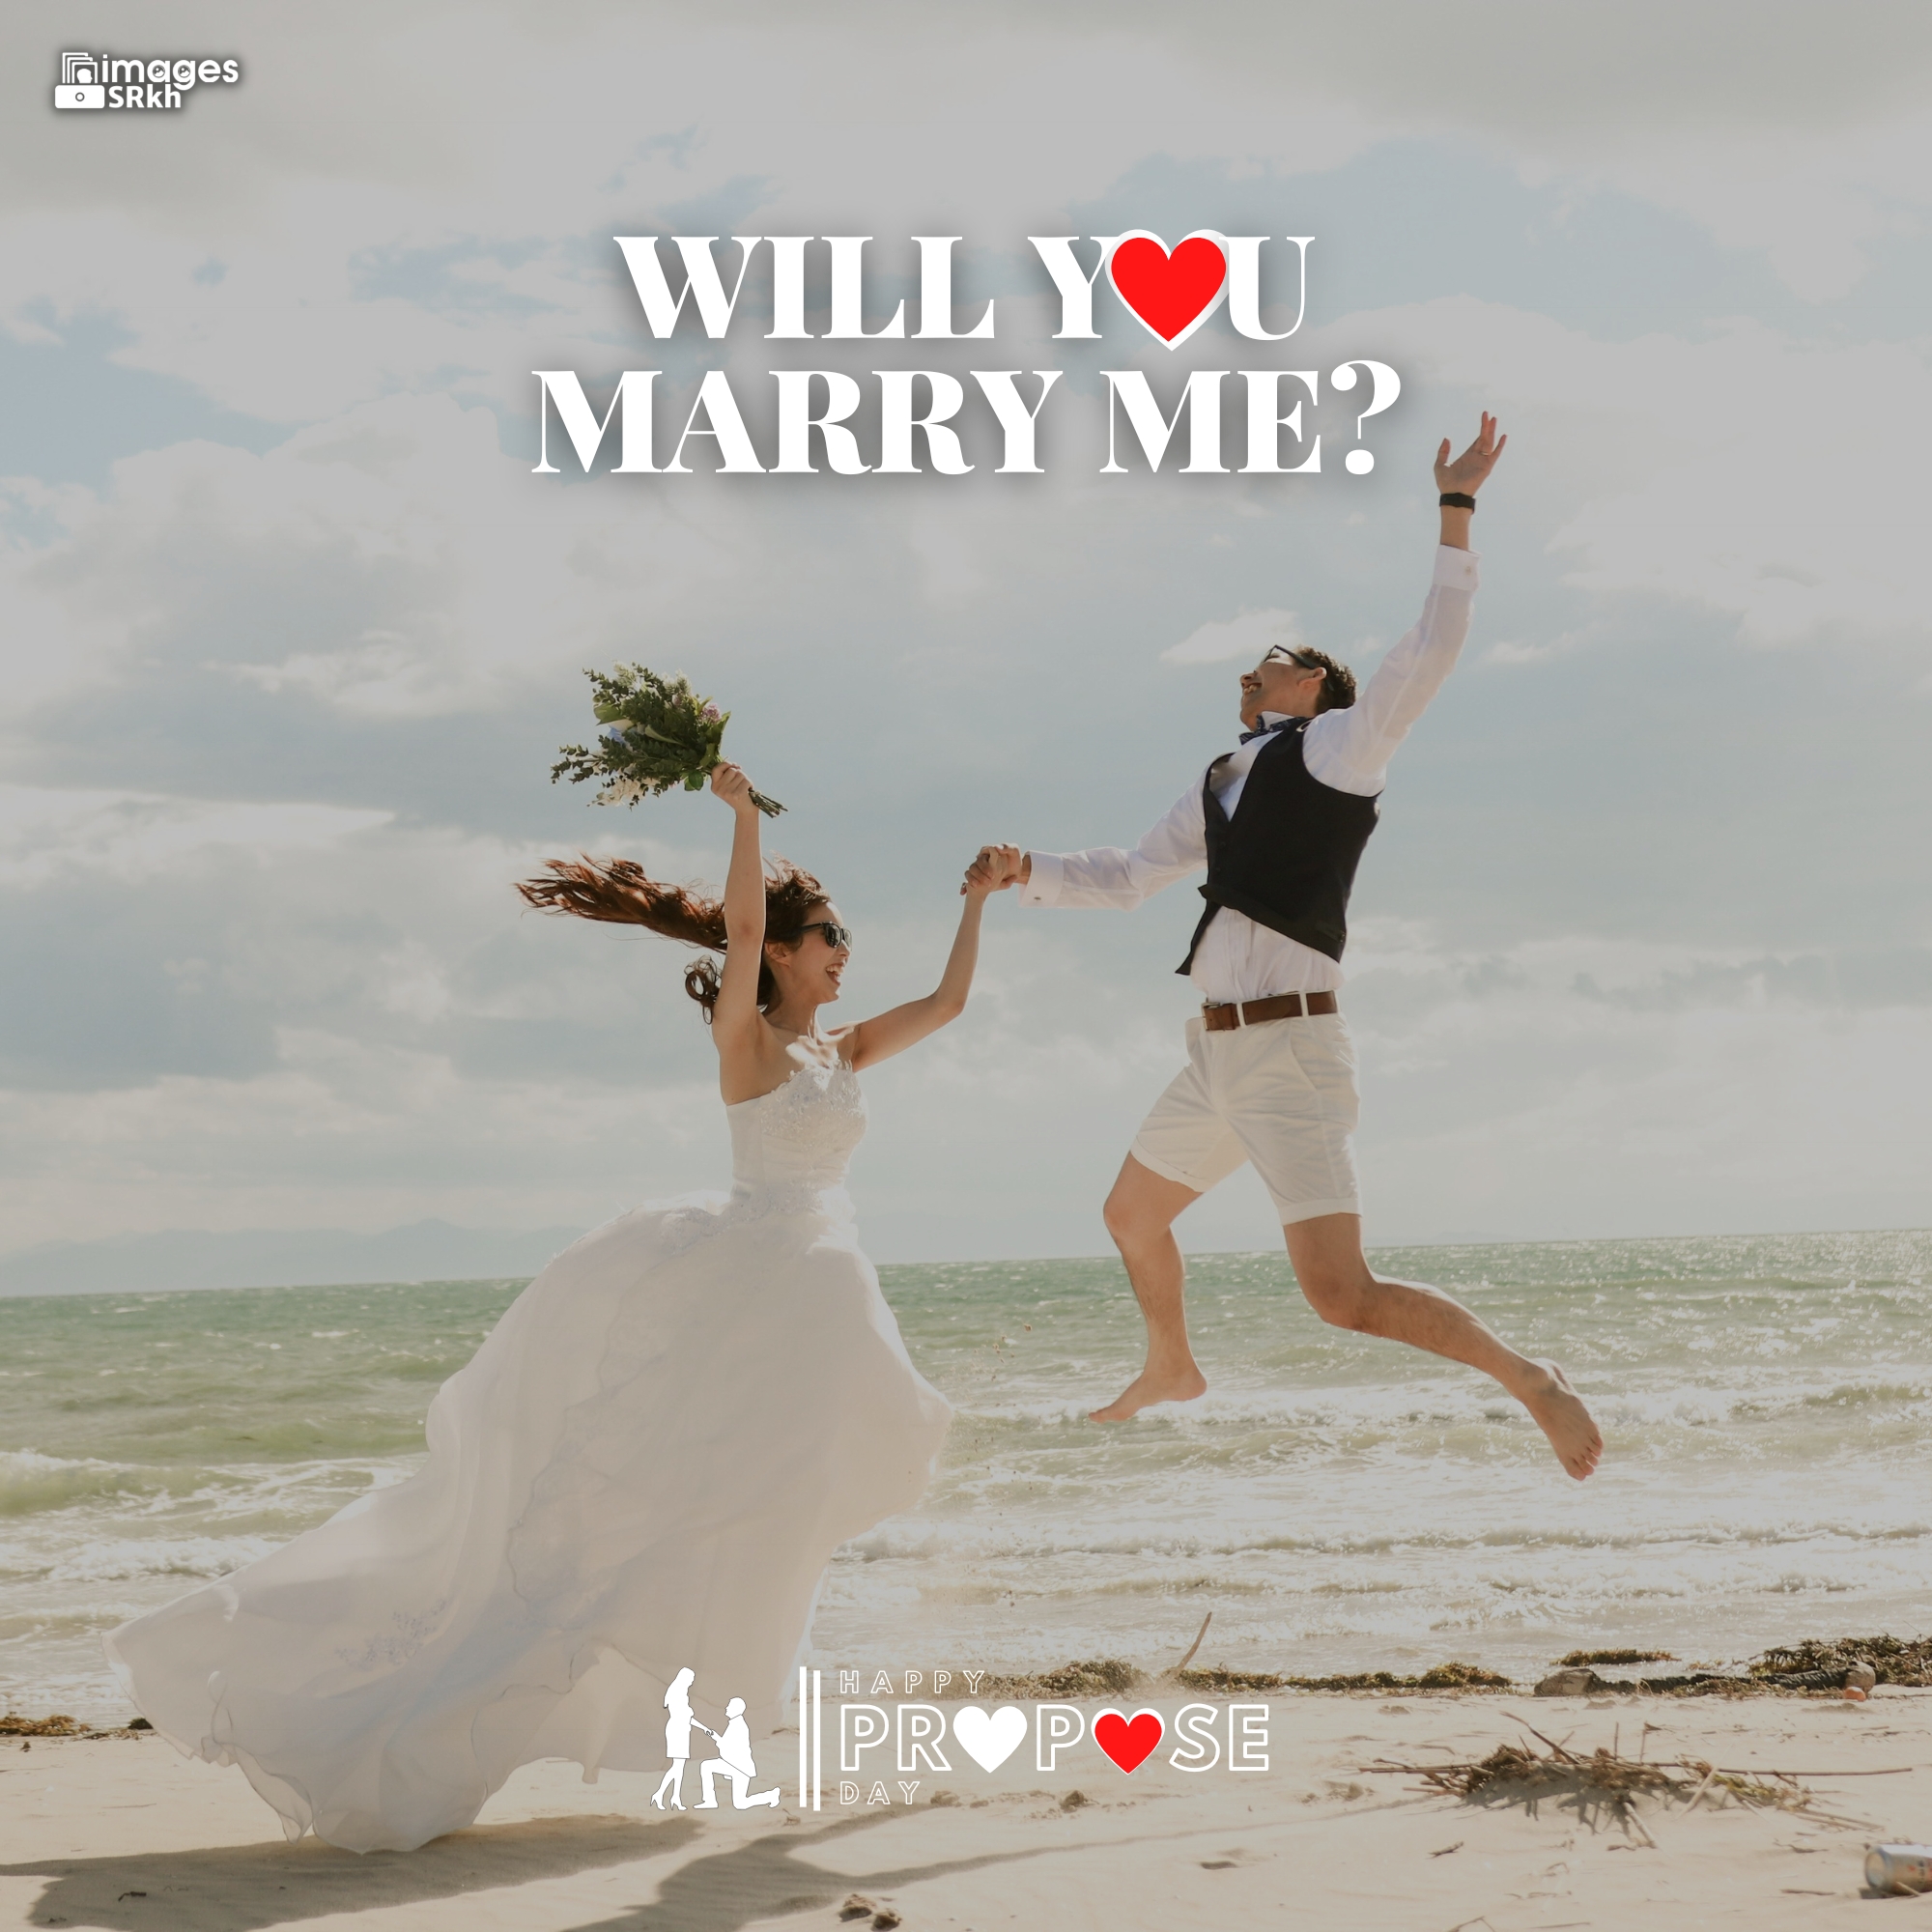 Propose Day Images | 271 | Will You MARRY ME